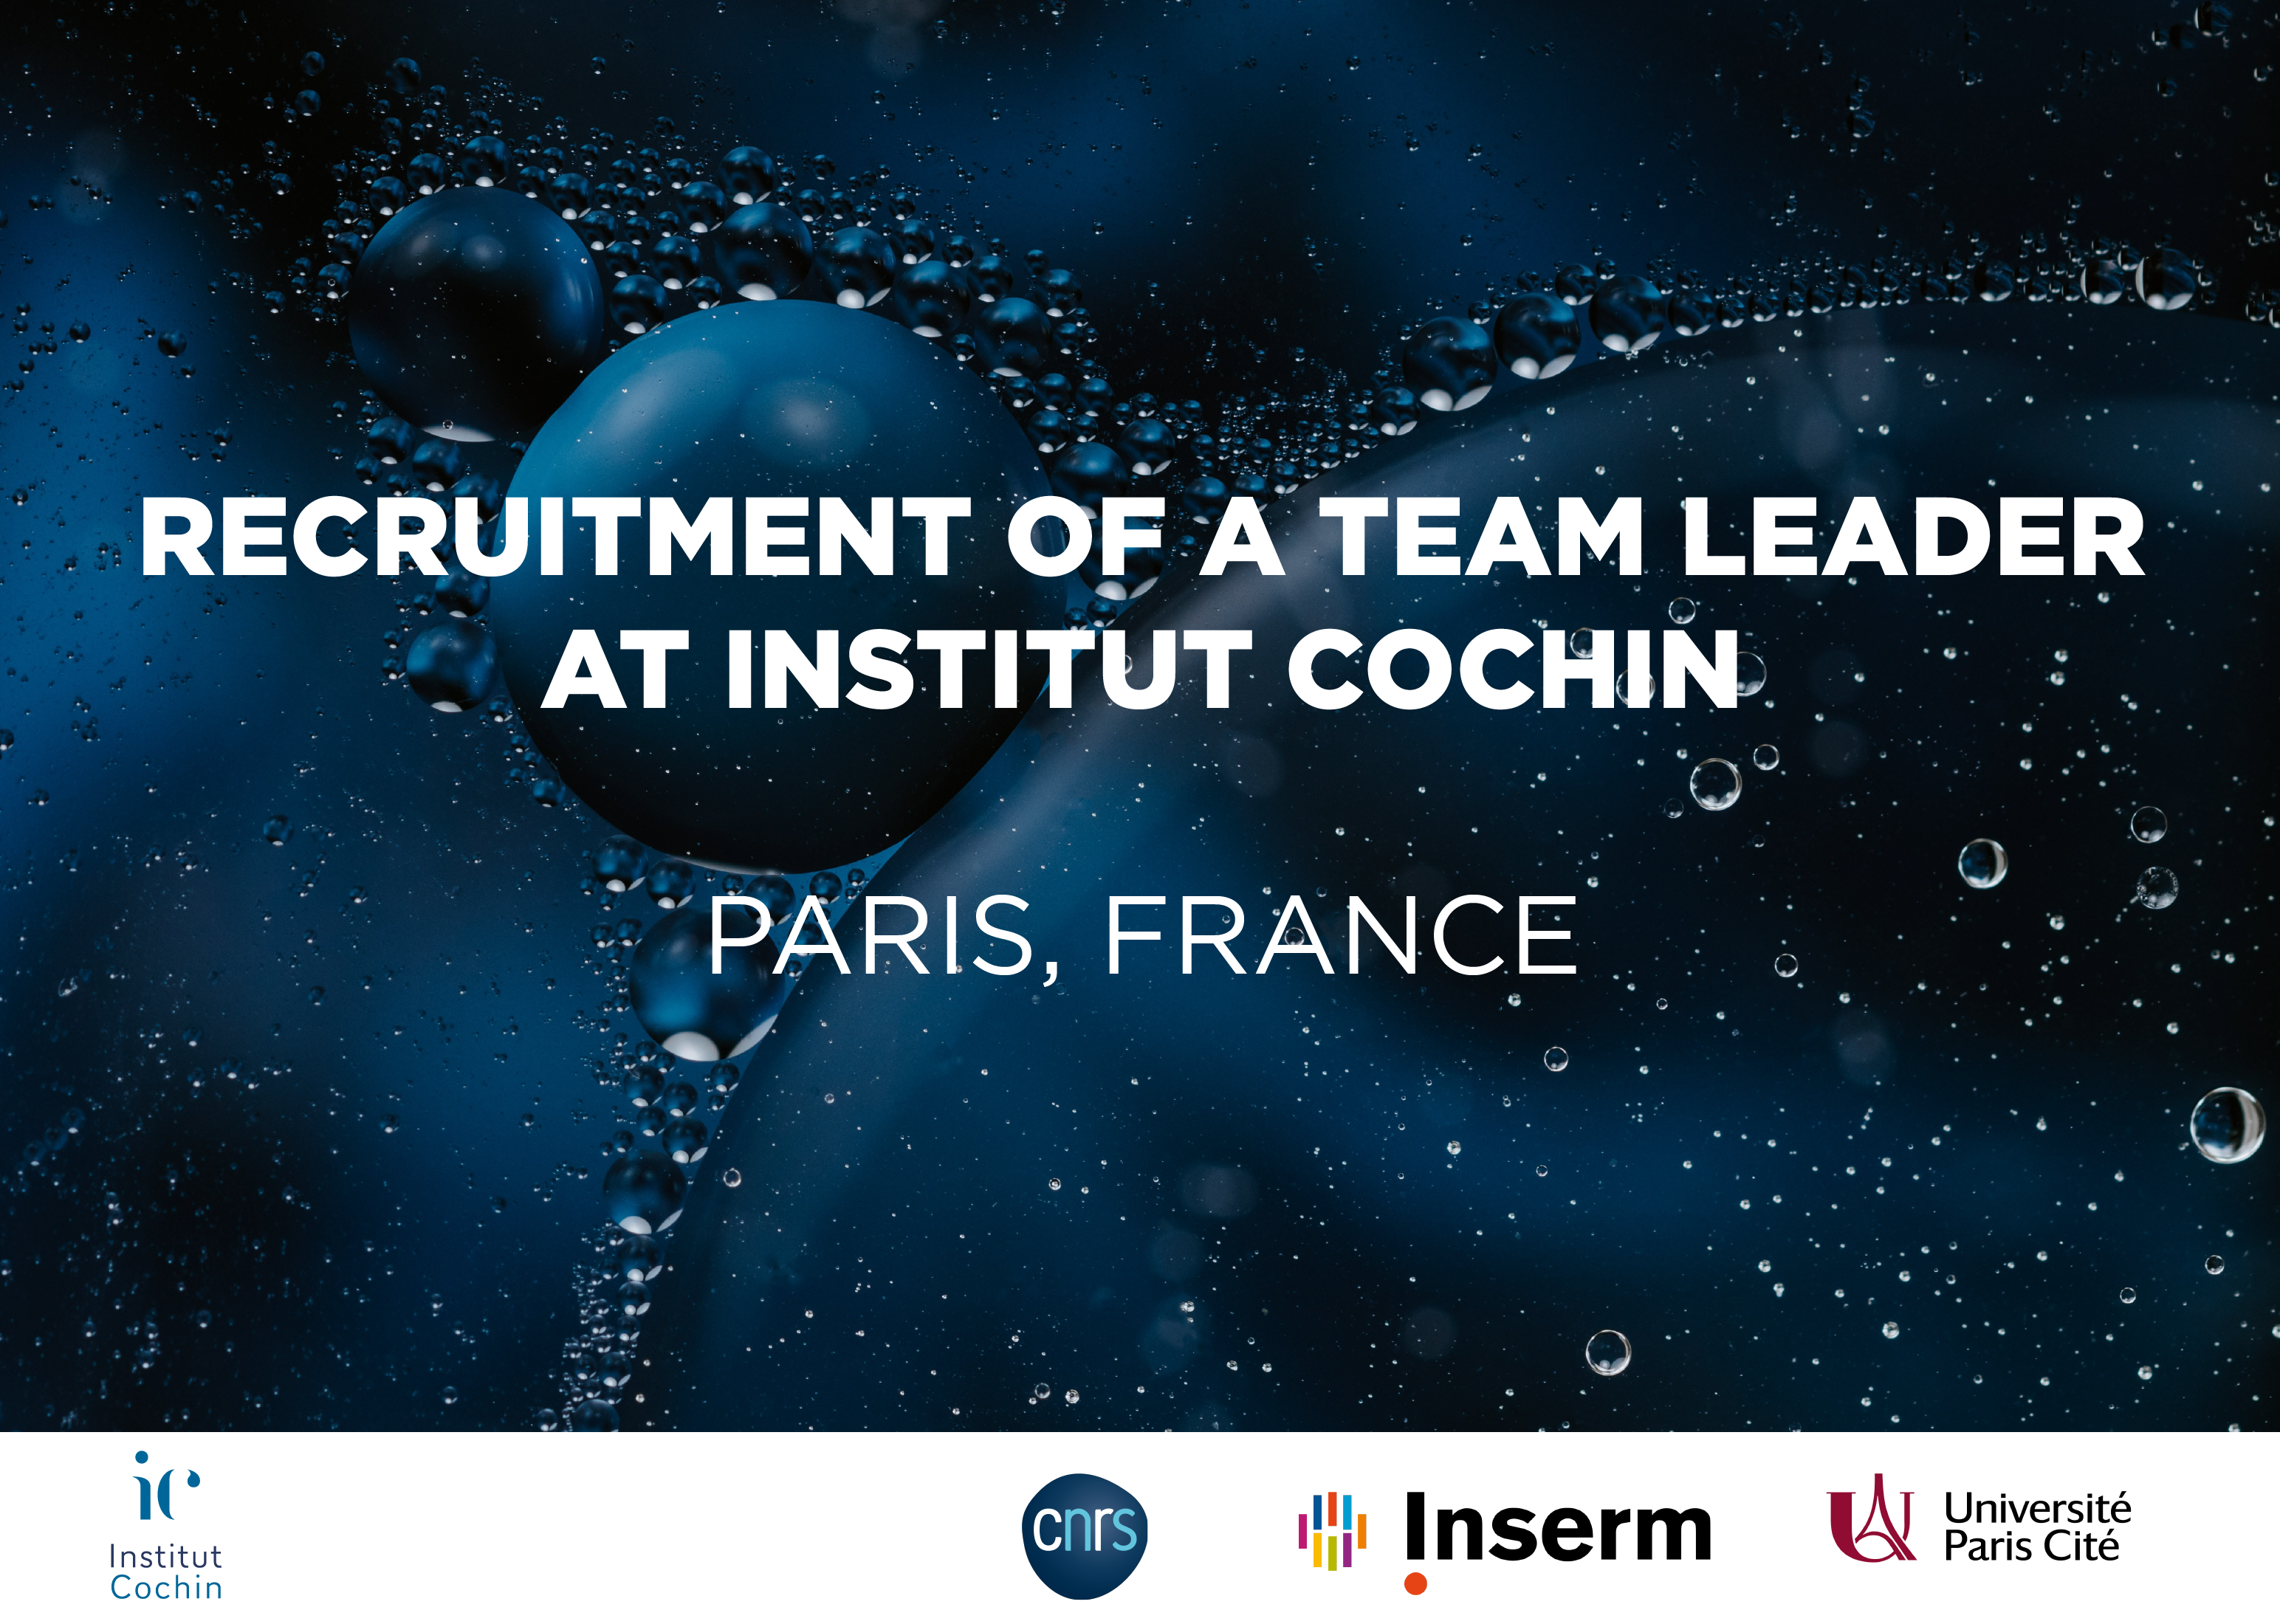 Recruitment of a group leader at Institut Cochin, Paris, France